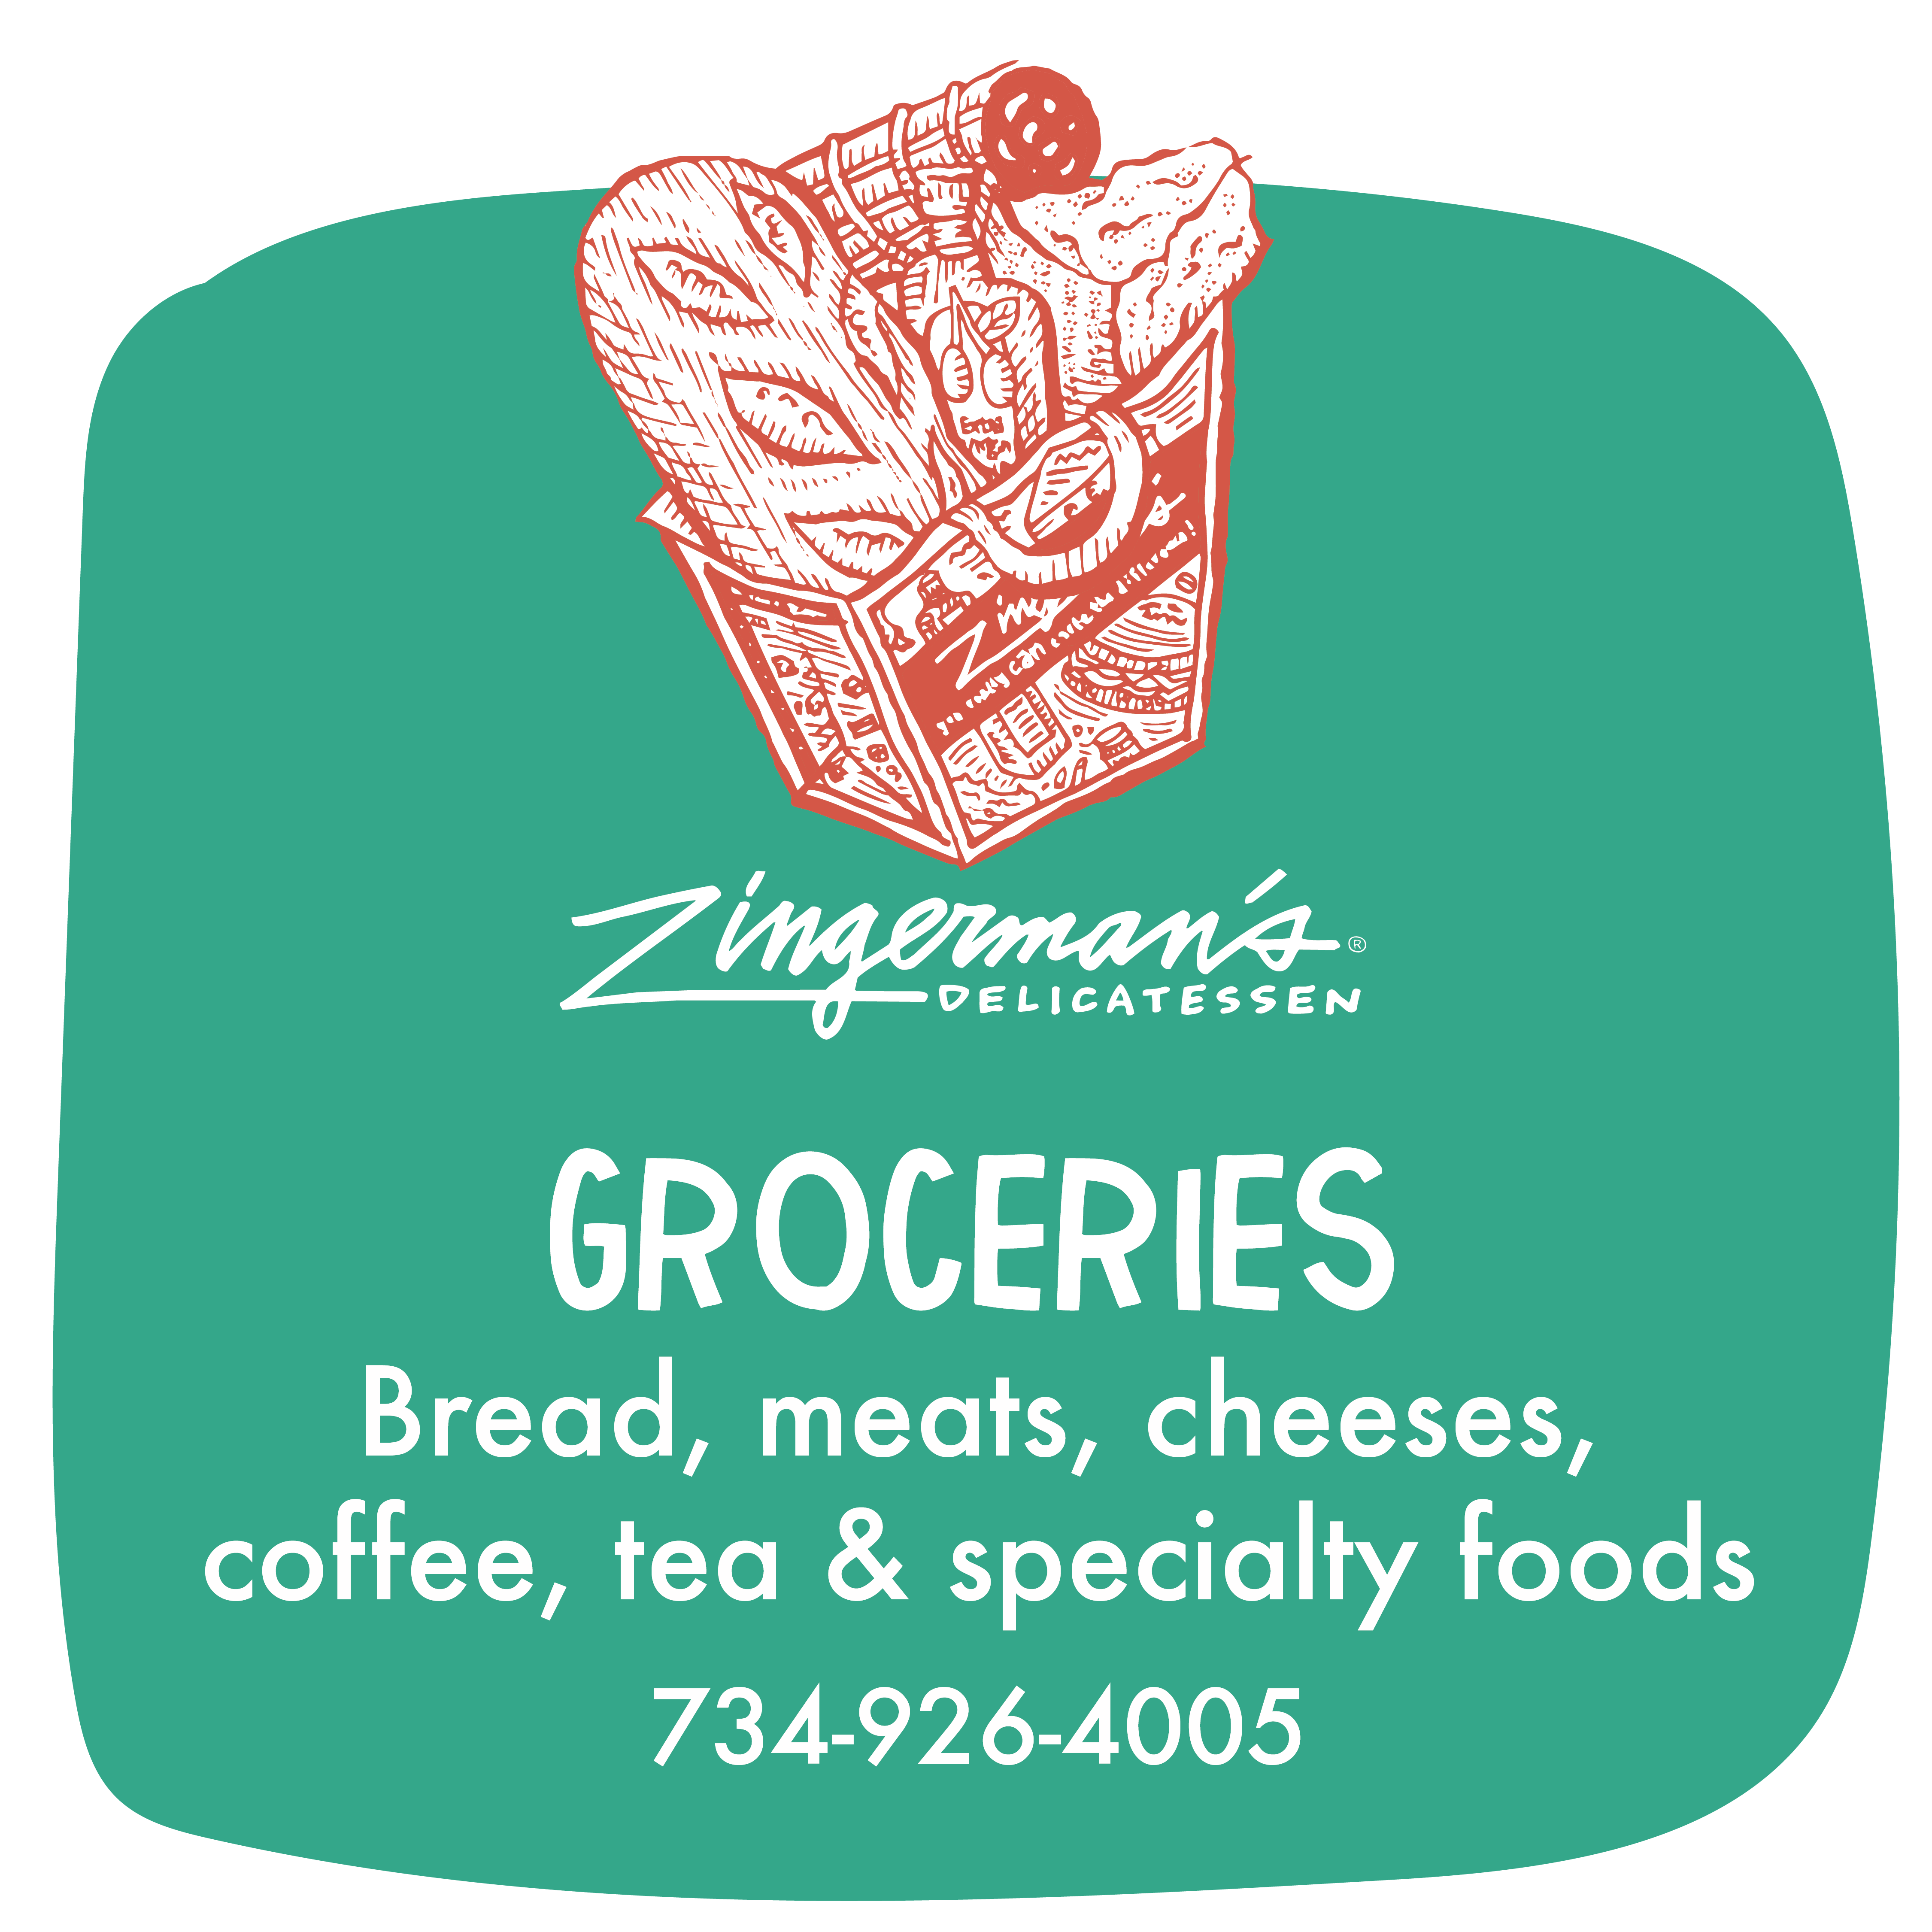 Zingerman's Groceries, bread, meats, cheeses, coffee, tea and specialty foods